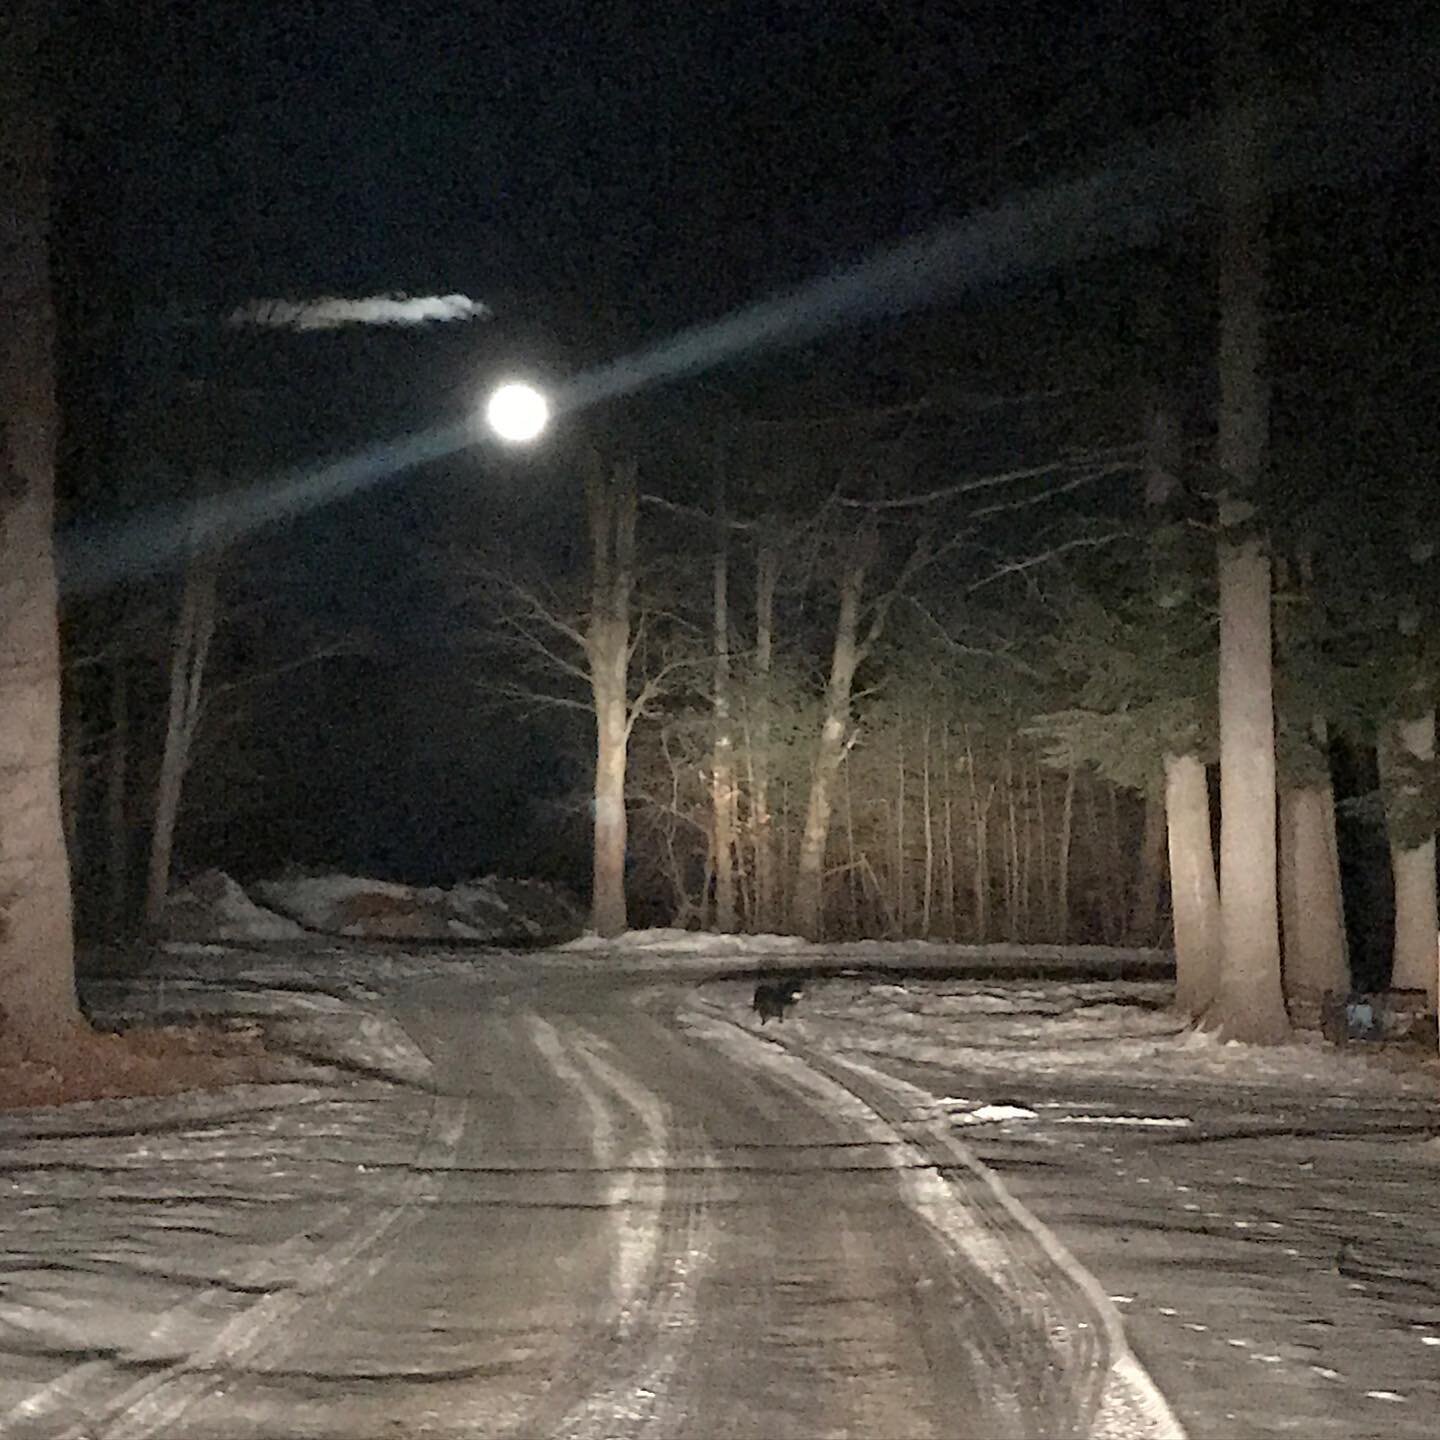 Taking the back road home #fullmoon #mainewinter #mainefarms